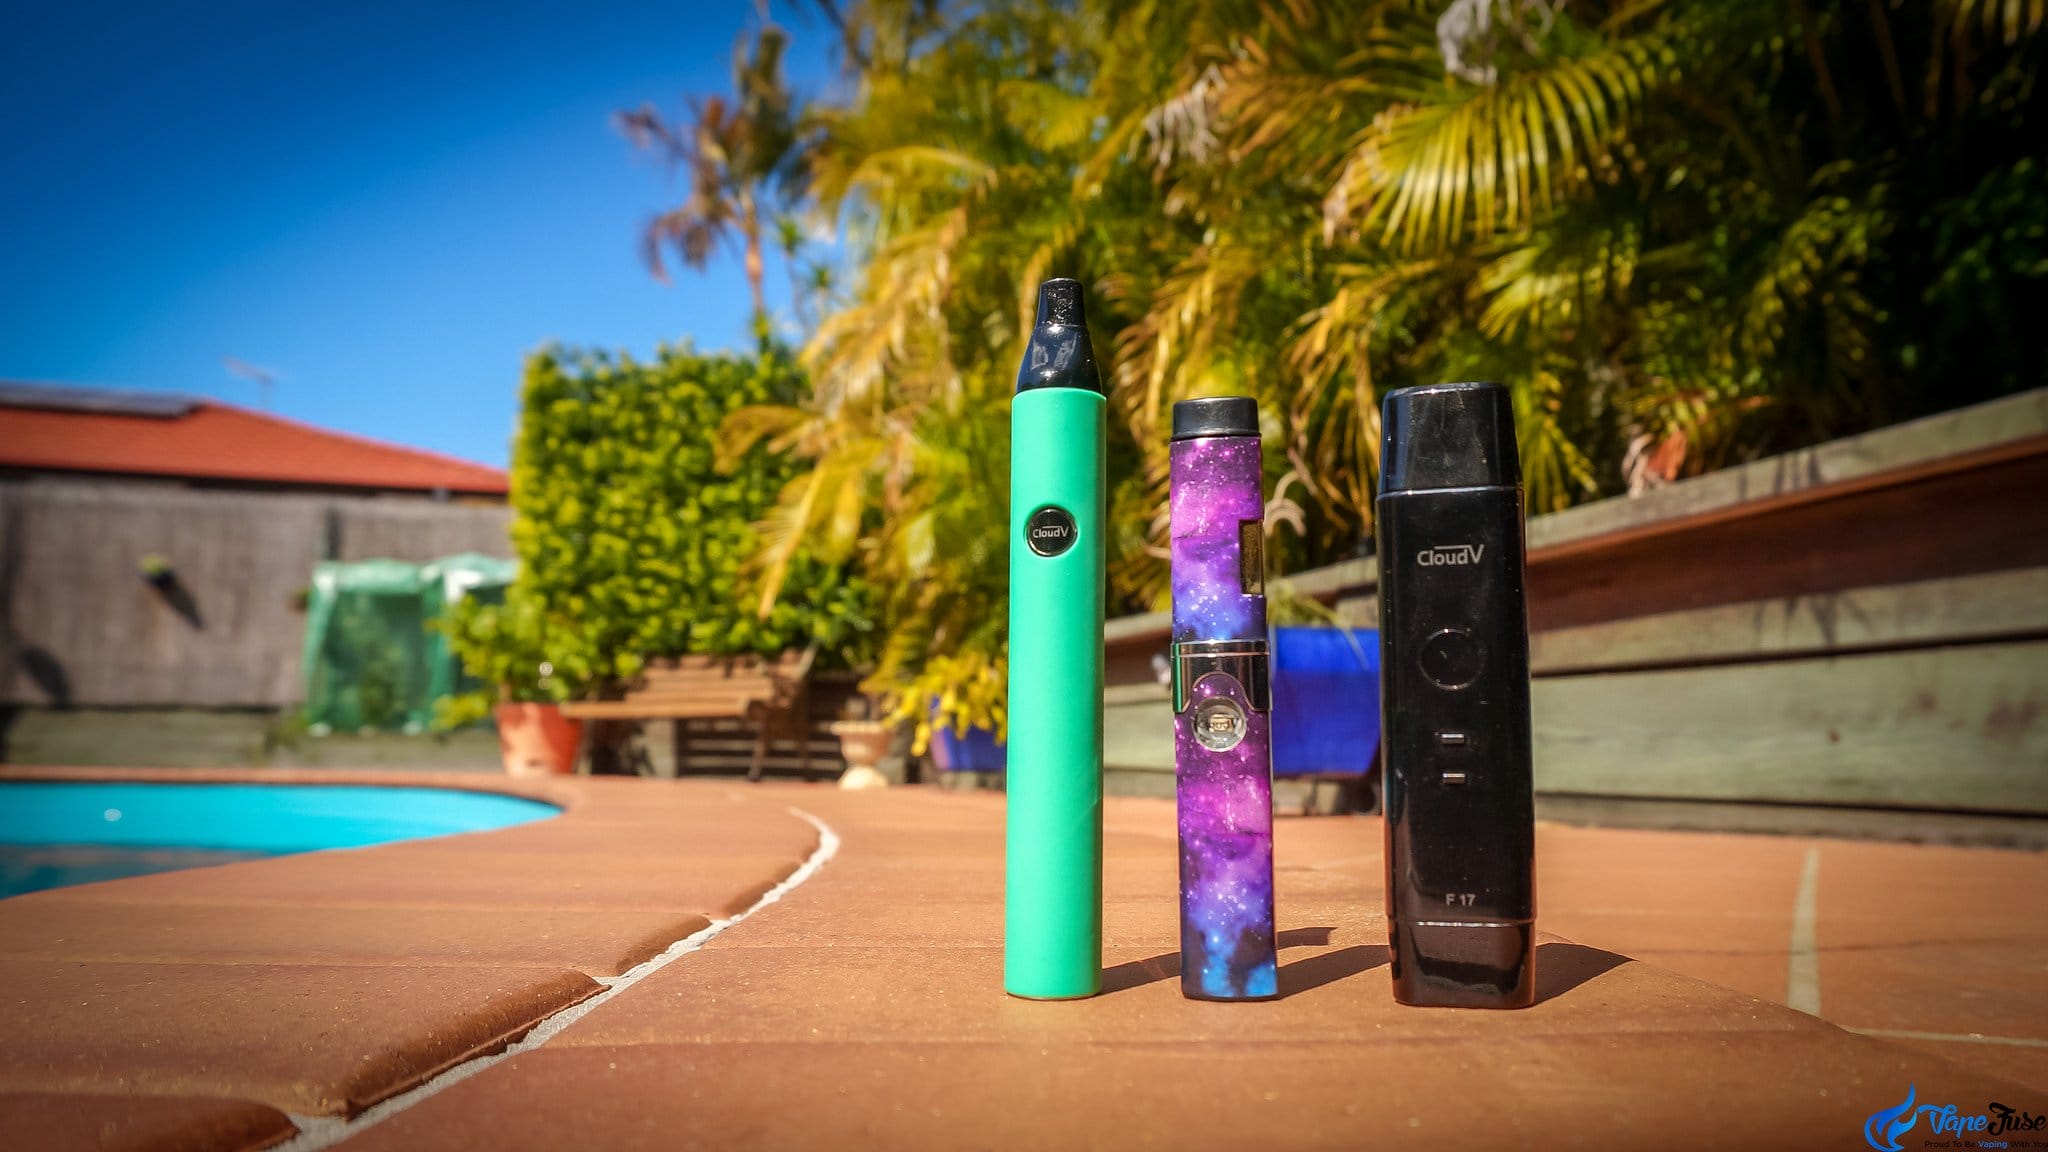 CloudV: The Stealthiest Vape Brand on the Market